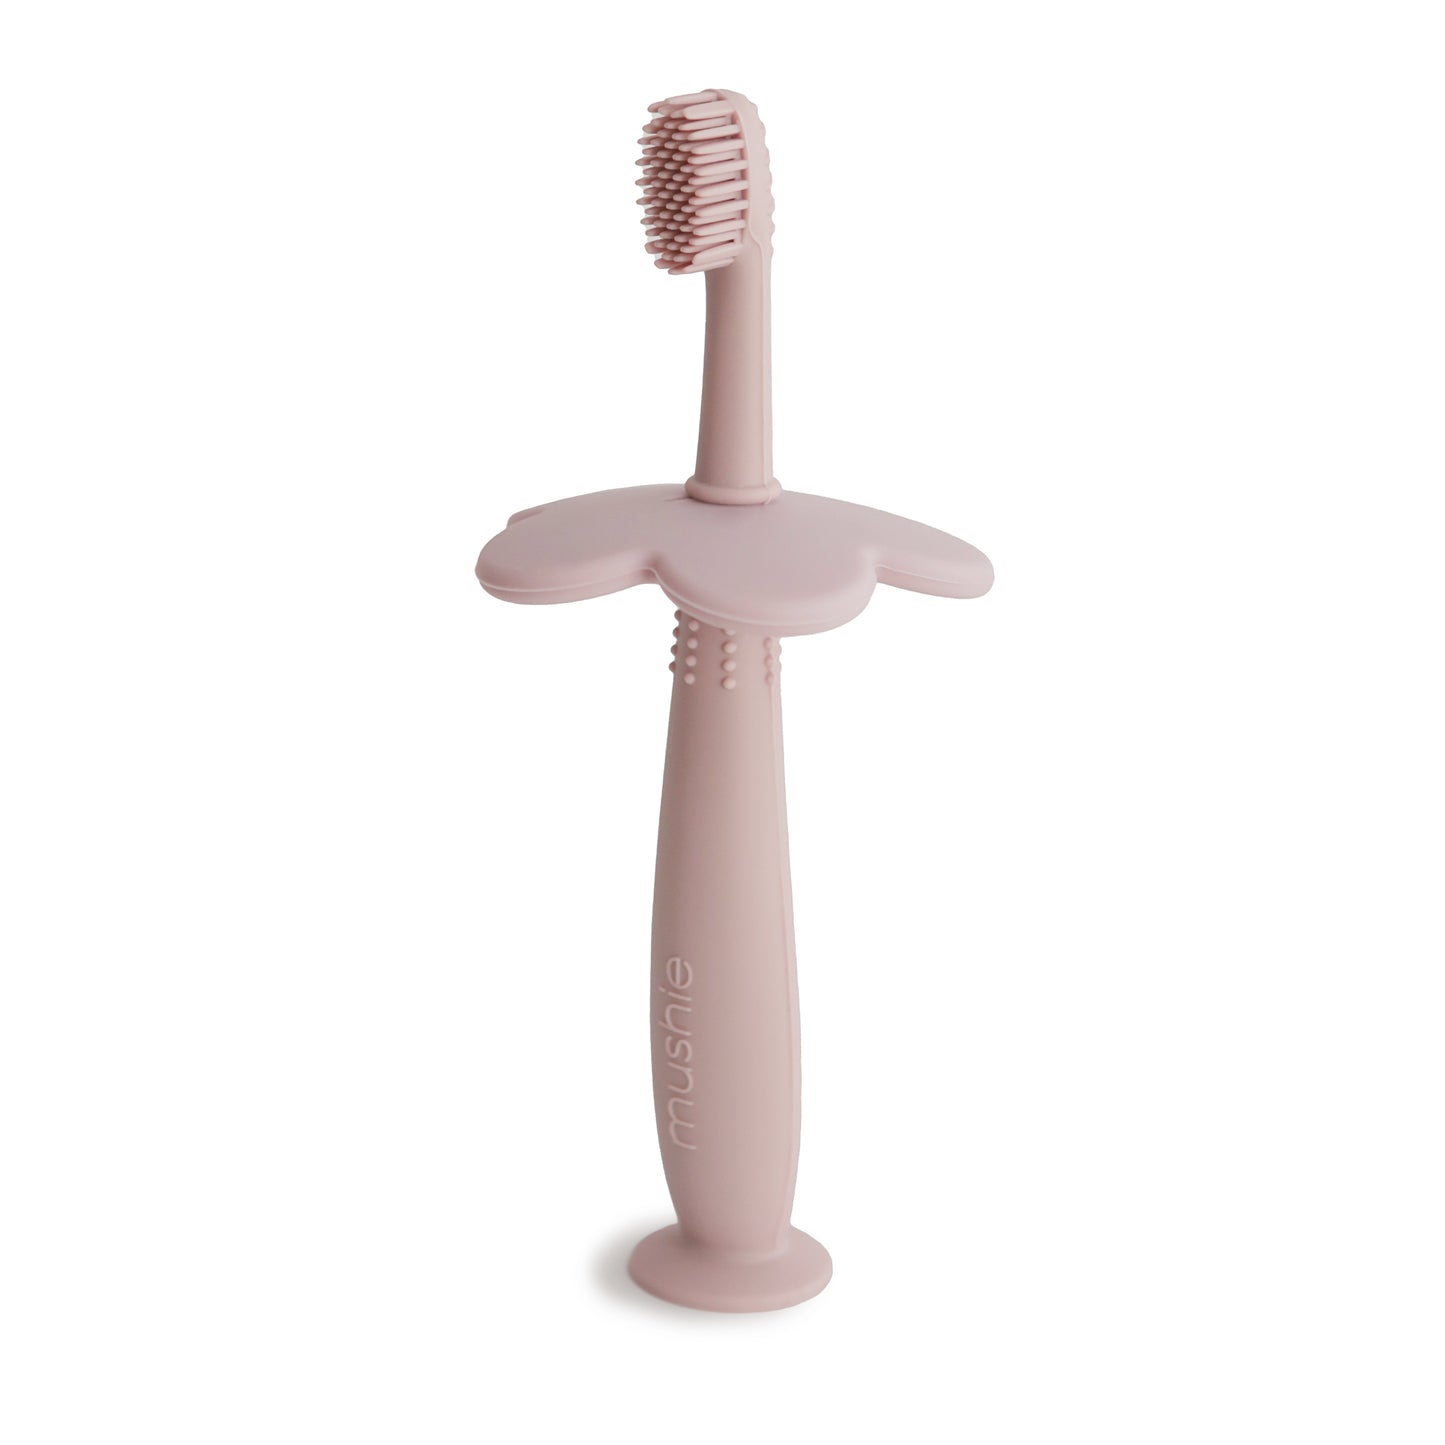 Flower training toothbrush from Mushie in color blush